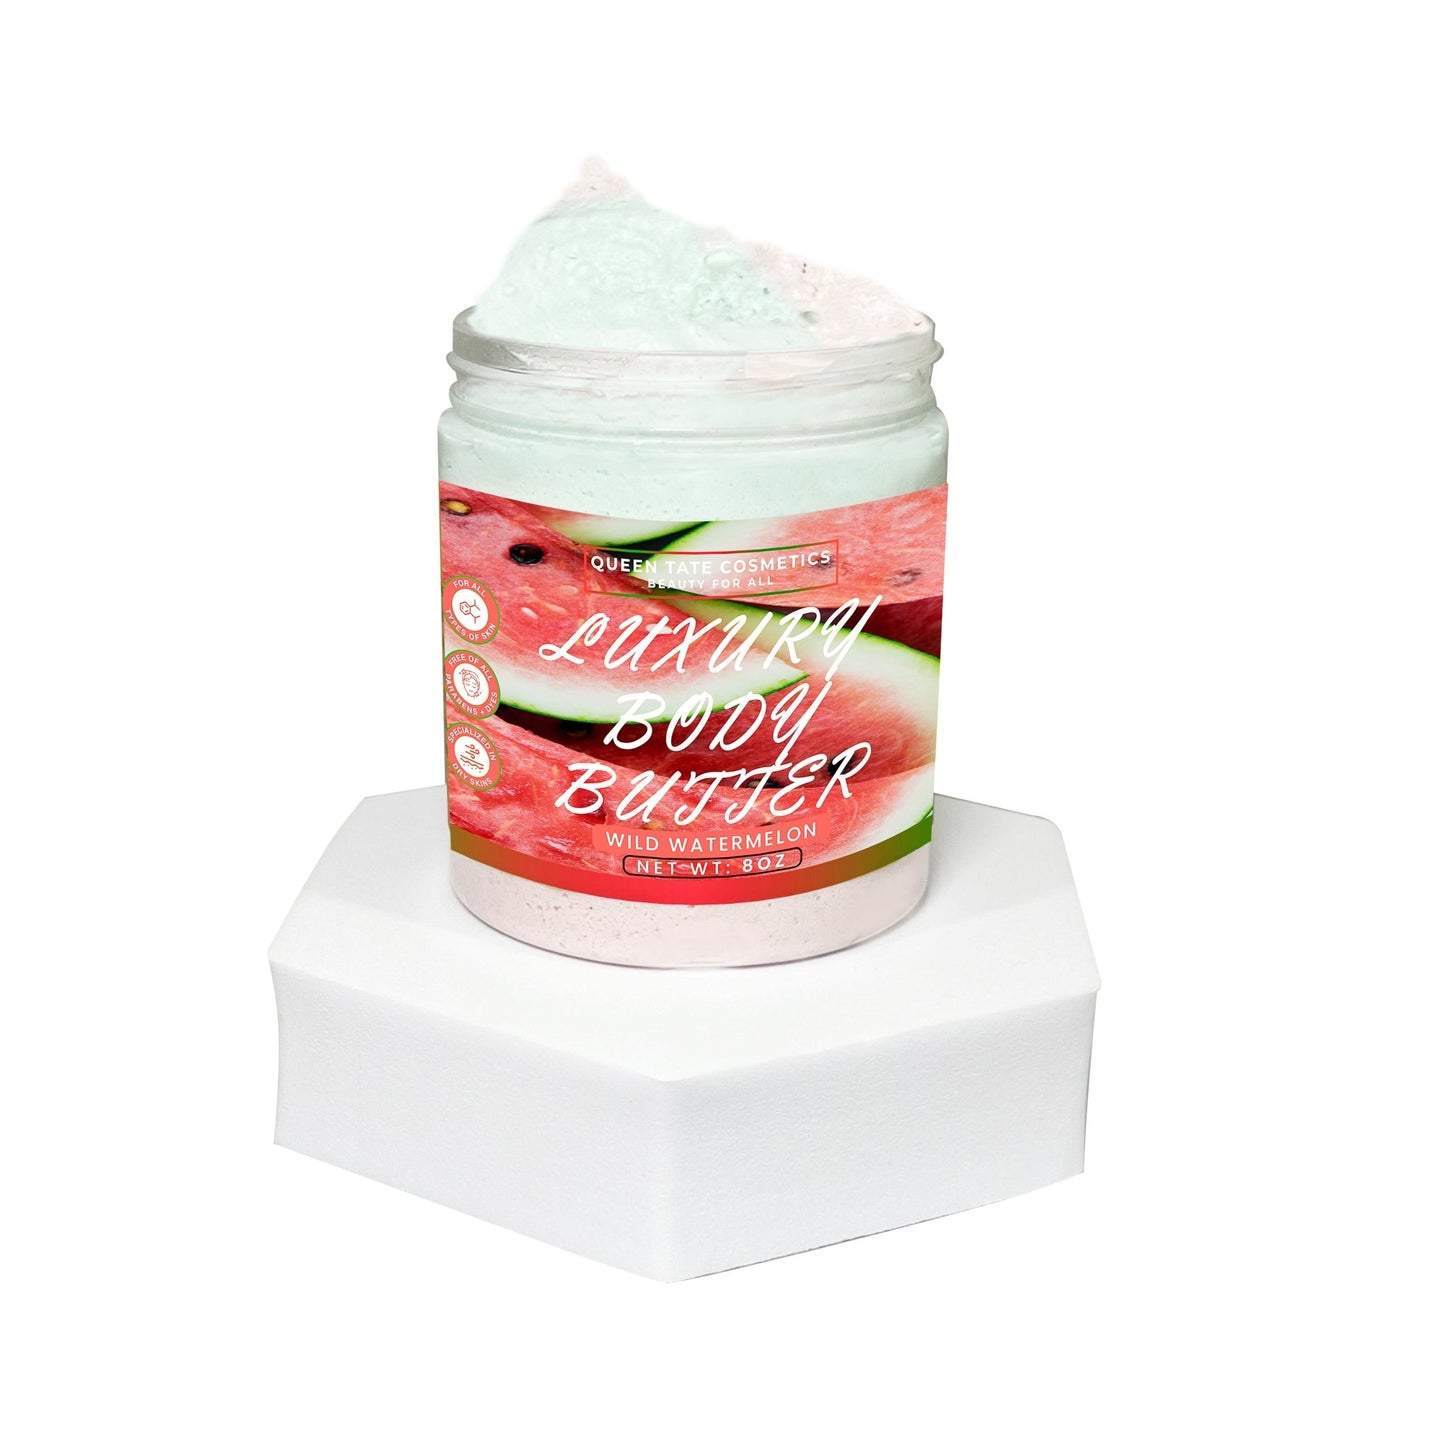 Wild Melon-Handcrafted Body Butter - Queen Tate CosmeticsHandcrafted Luxury Body ButterWild Melon-Handcrafted Body ButterHandcrafted Luxury Body ButterQueen Tate Cosmetics 8 oz